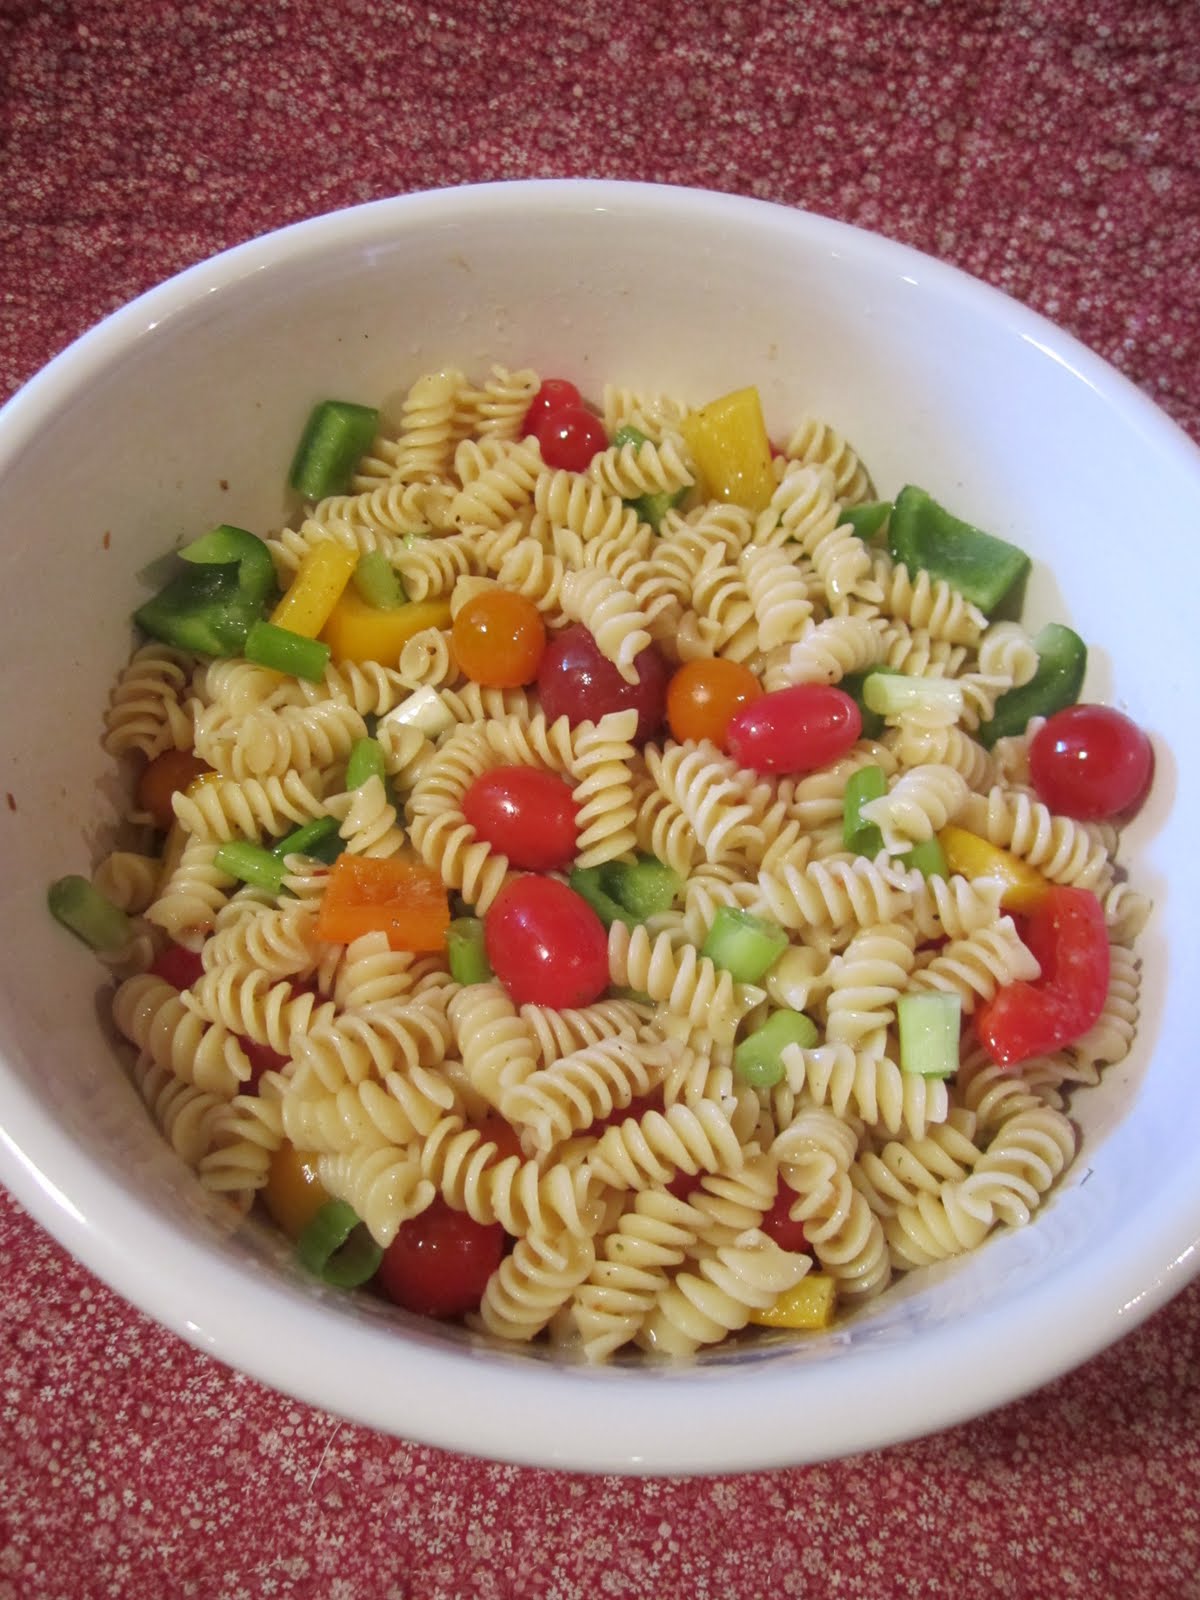 How to Make a Cold Pasta Salad Recipe - Wendys Hat